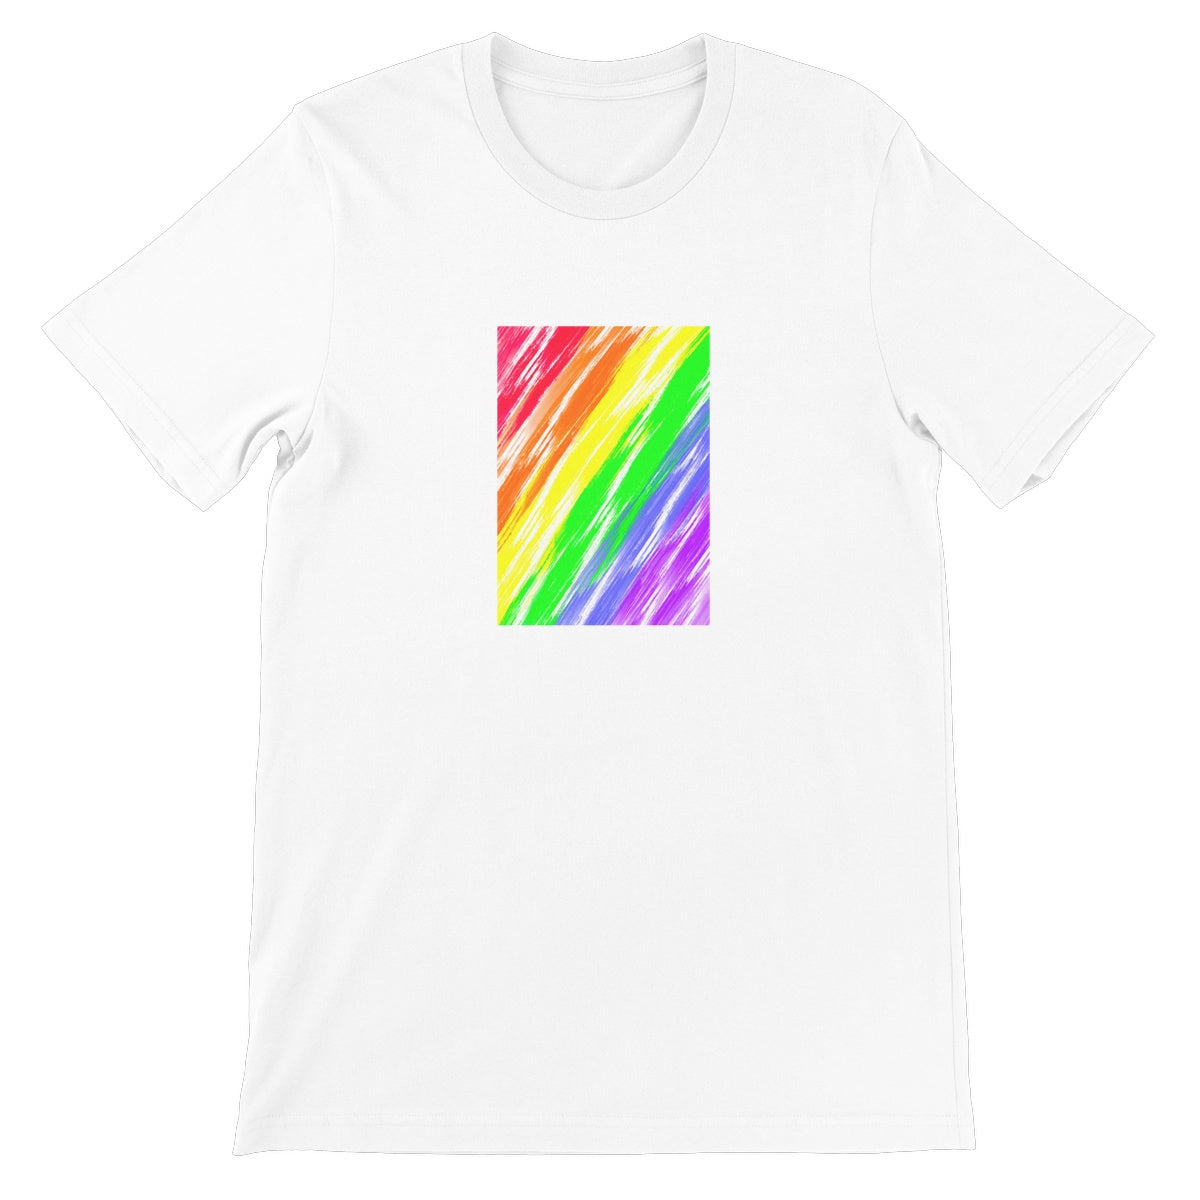 White unisex crew neck t-shirt with a digital art rainbow design in the centre of the chest.